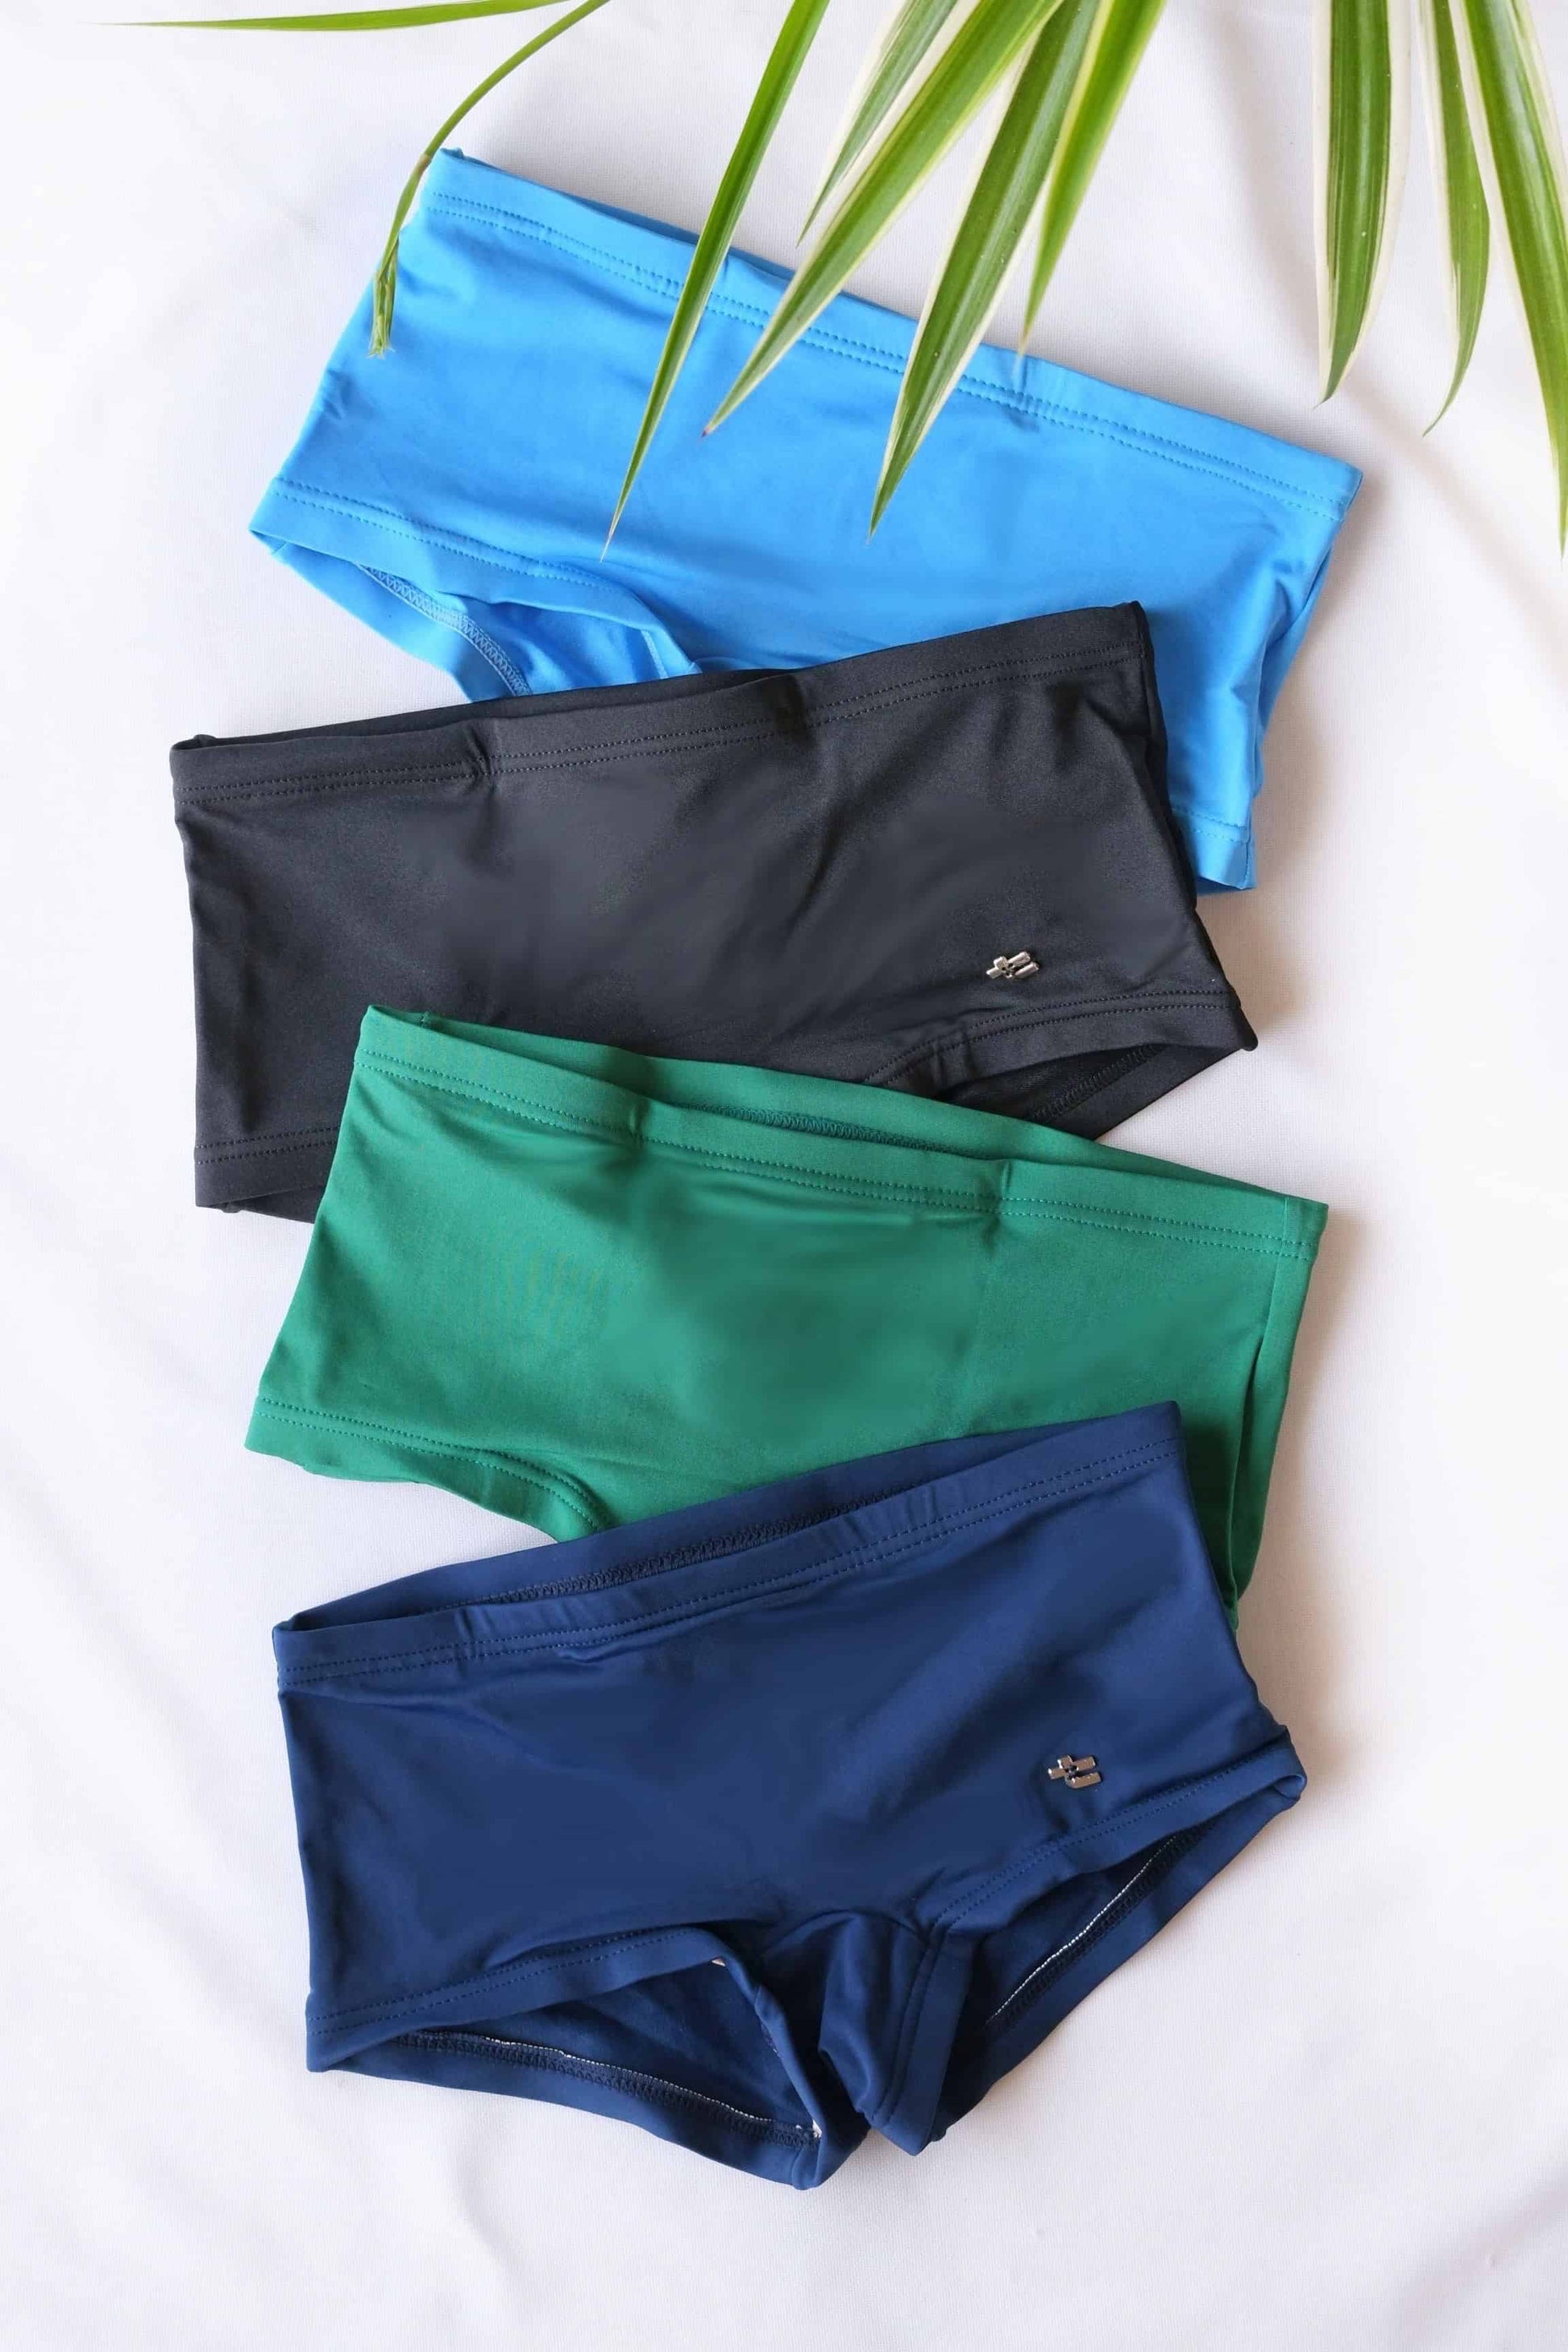 Blue, black, green, and navy Tropic vintage 70s briefs on white background